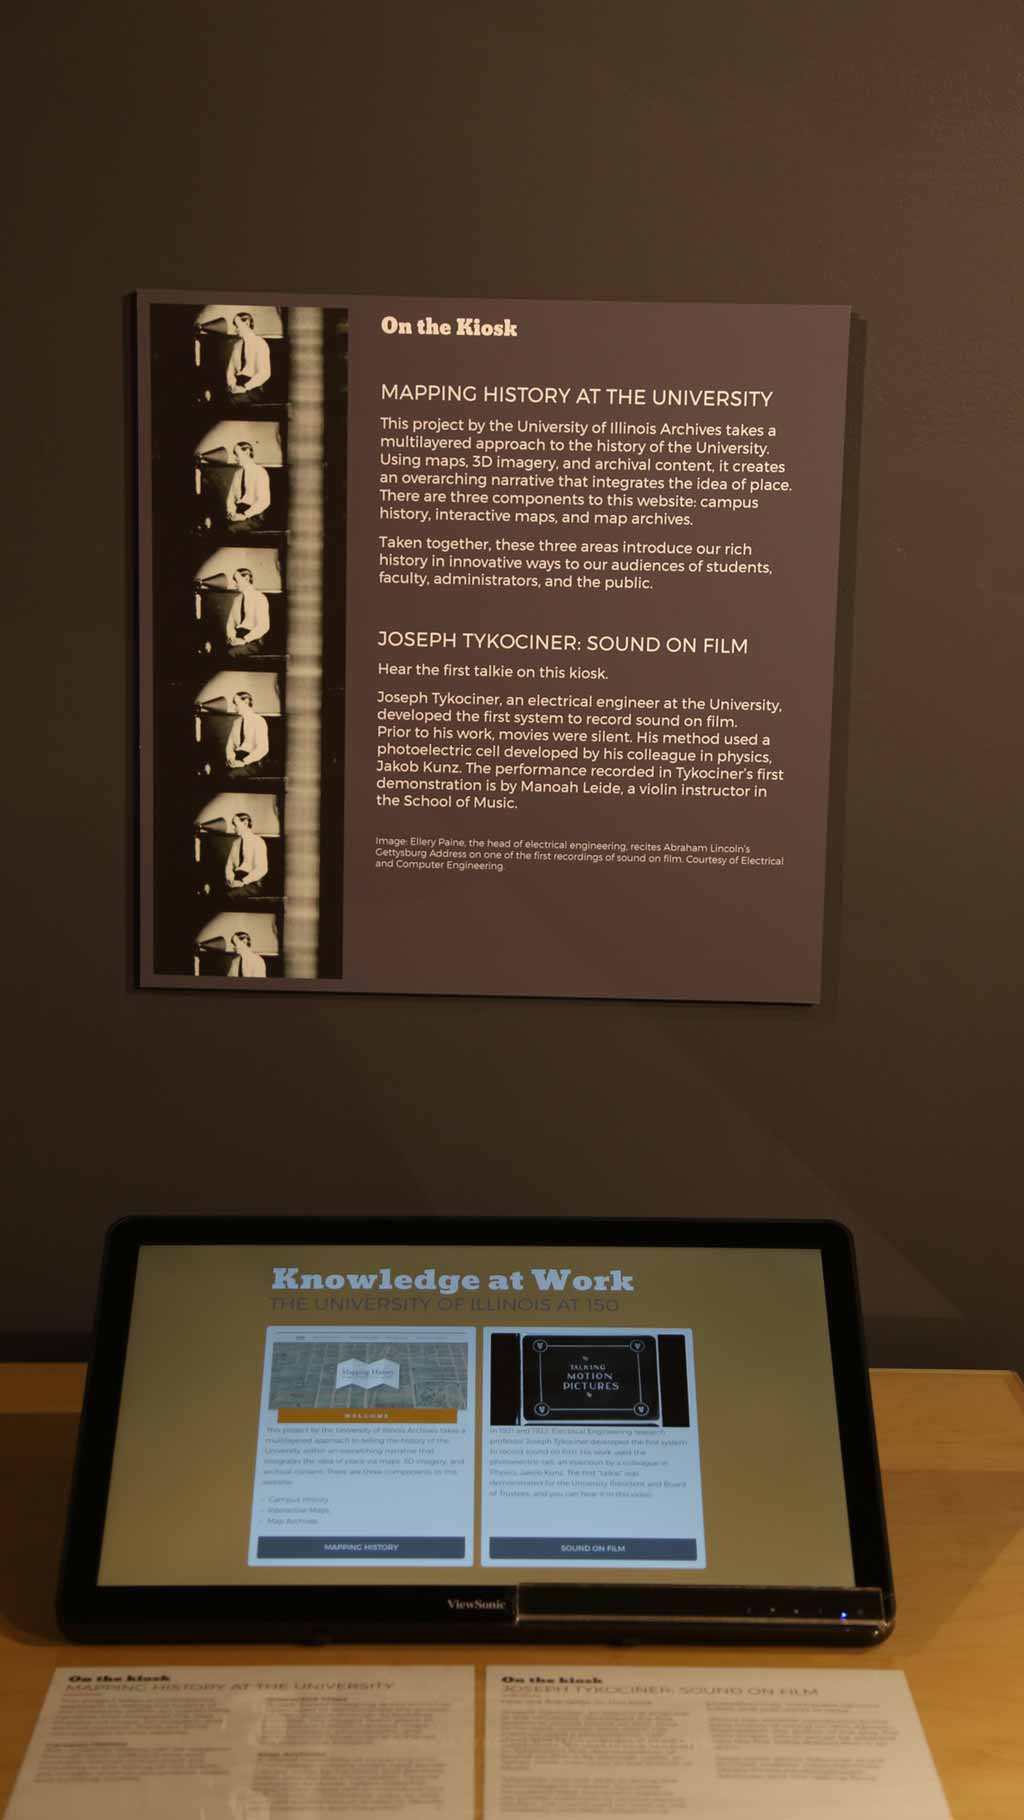 close-up of a part of the exhibit with an electronic device and a text panel about film, sound, and mapping